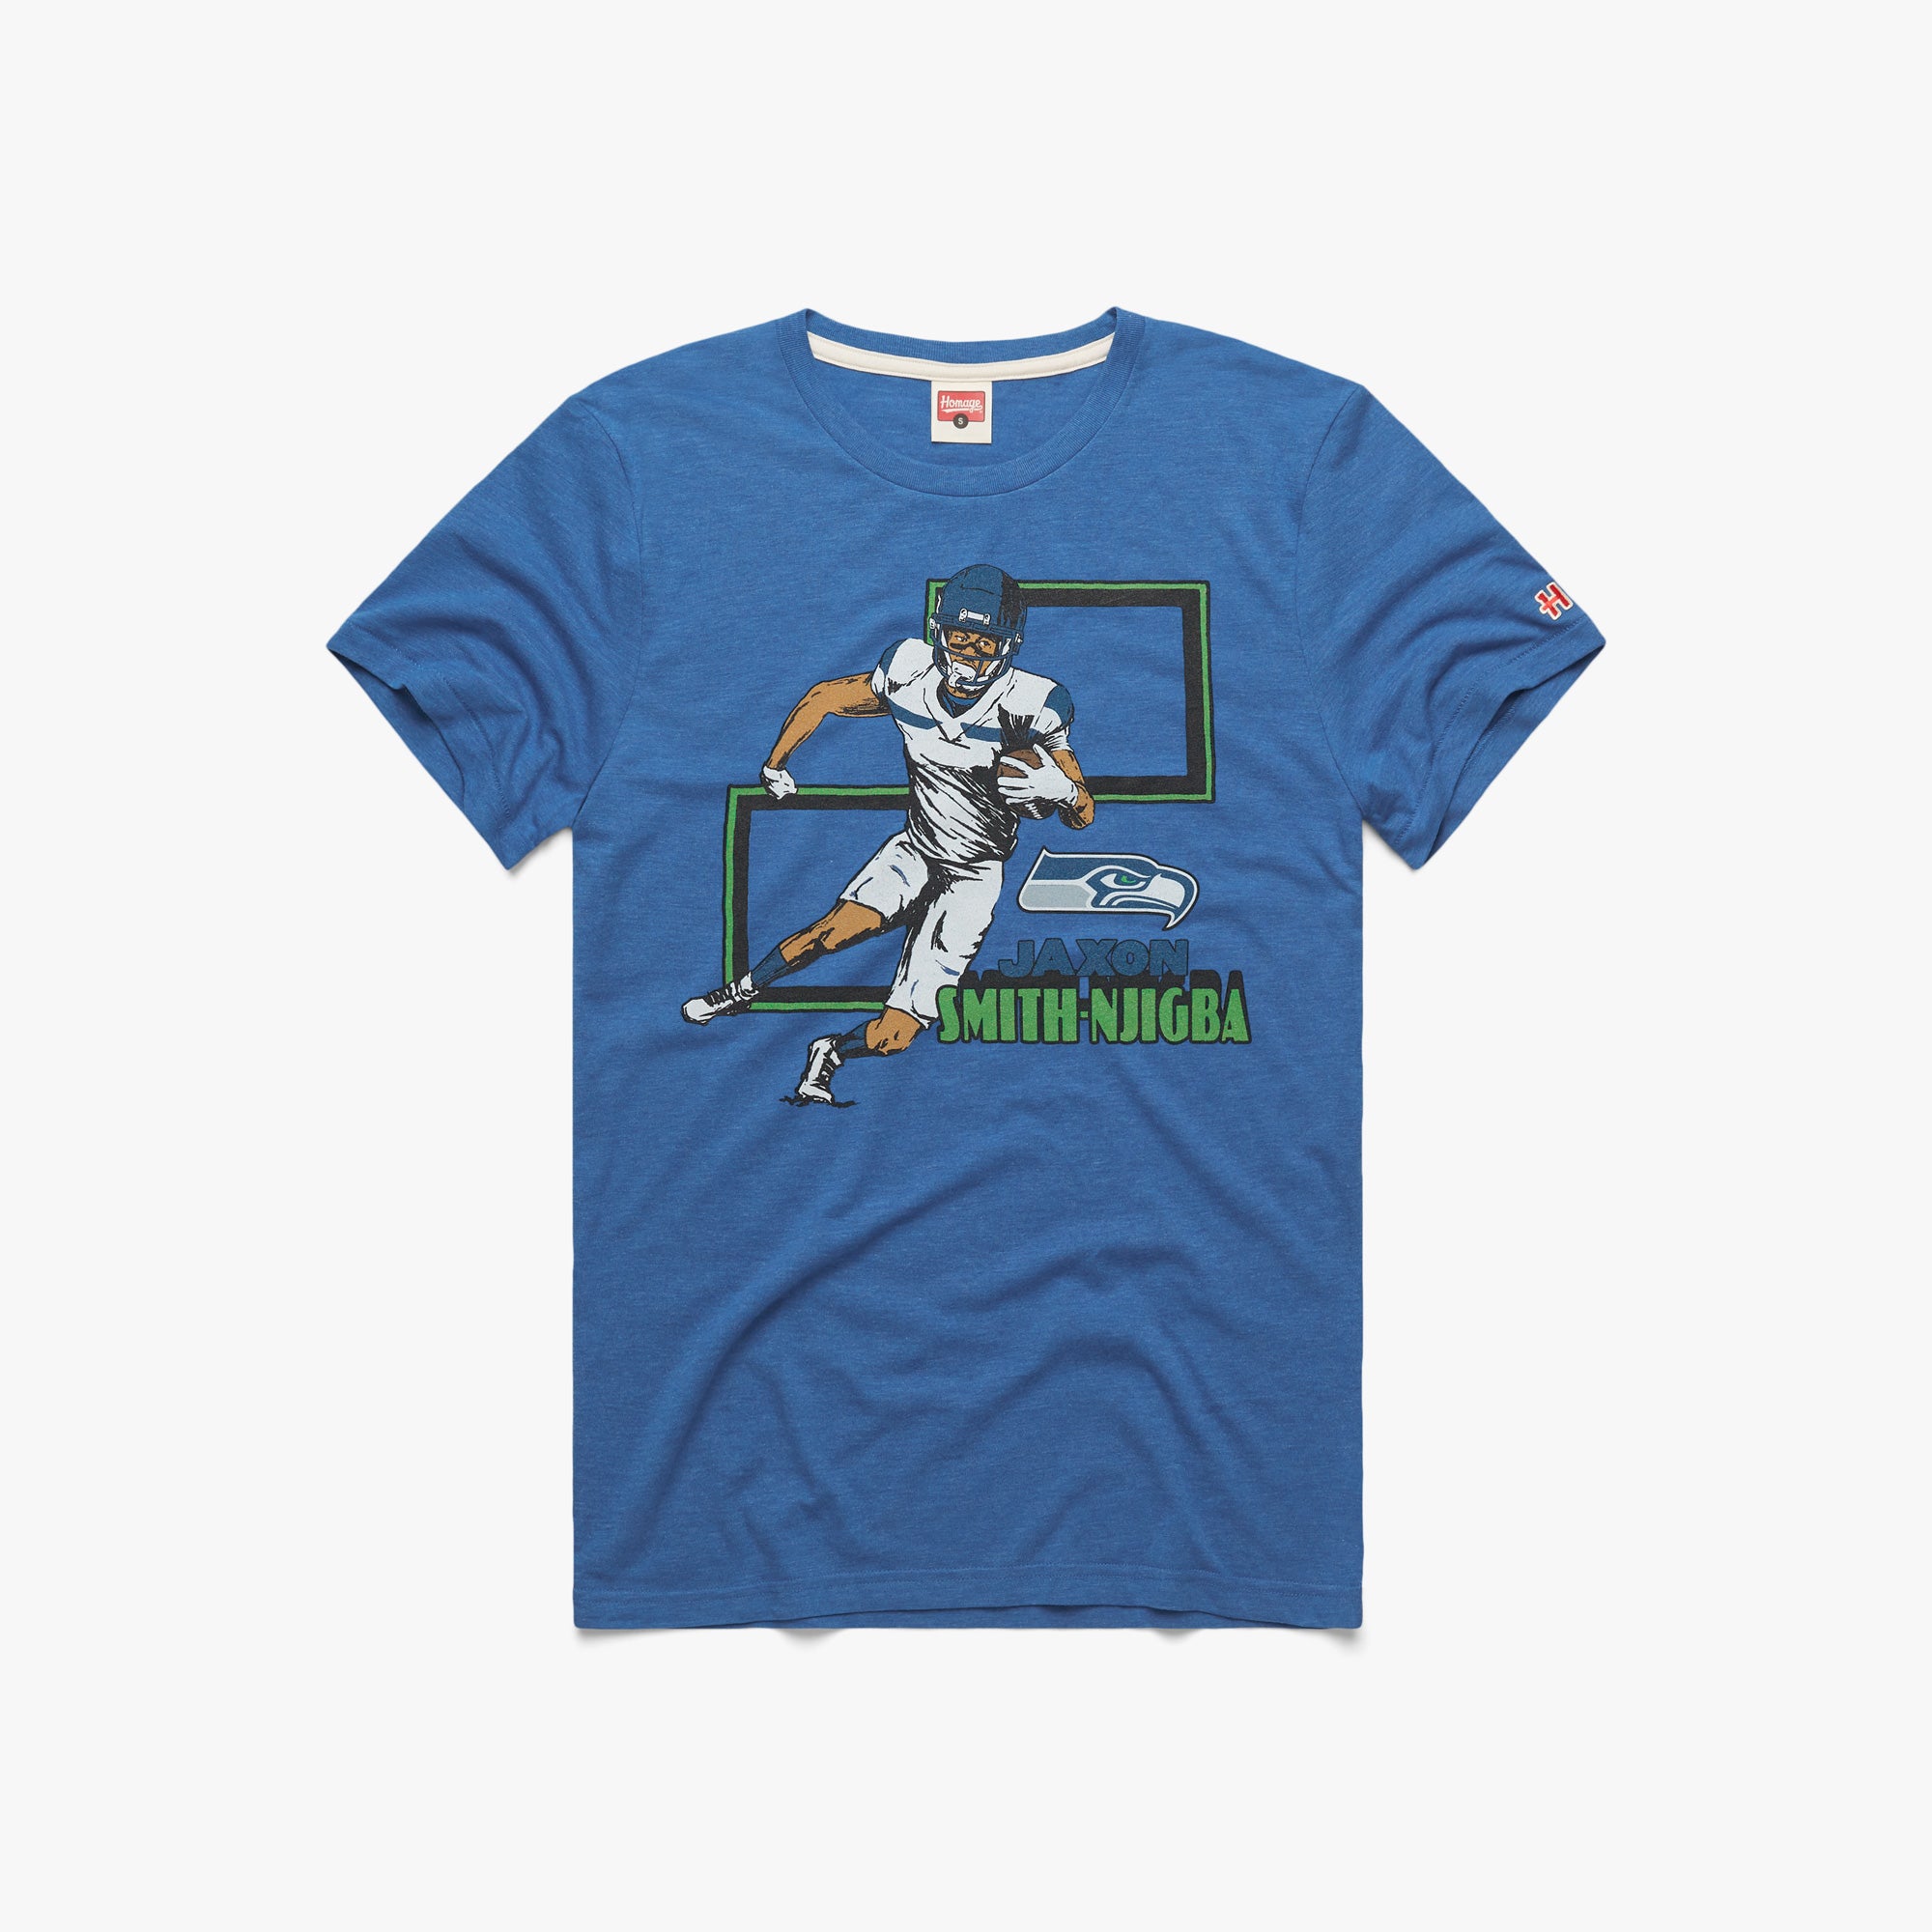 Seattle Seahawks Jaxon Smith-Njigba Draft T-Shirt from Homage. | Officially Licensed Vintage NFL Apparel from Homage Pro Shop.